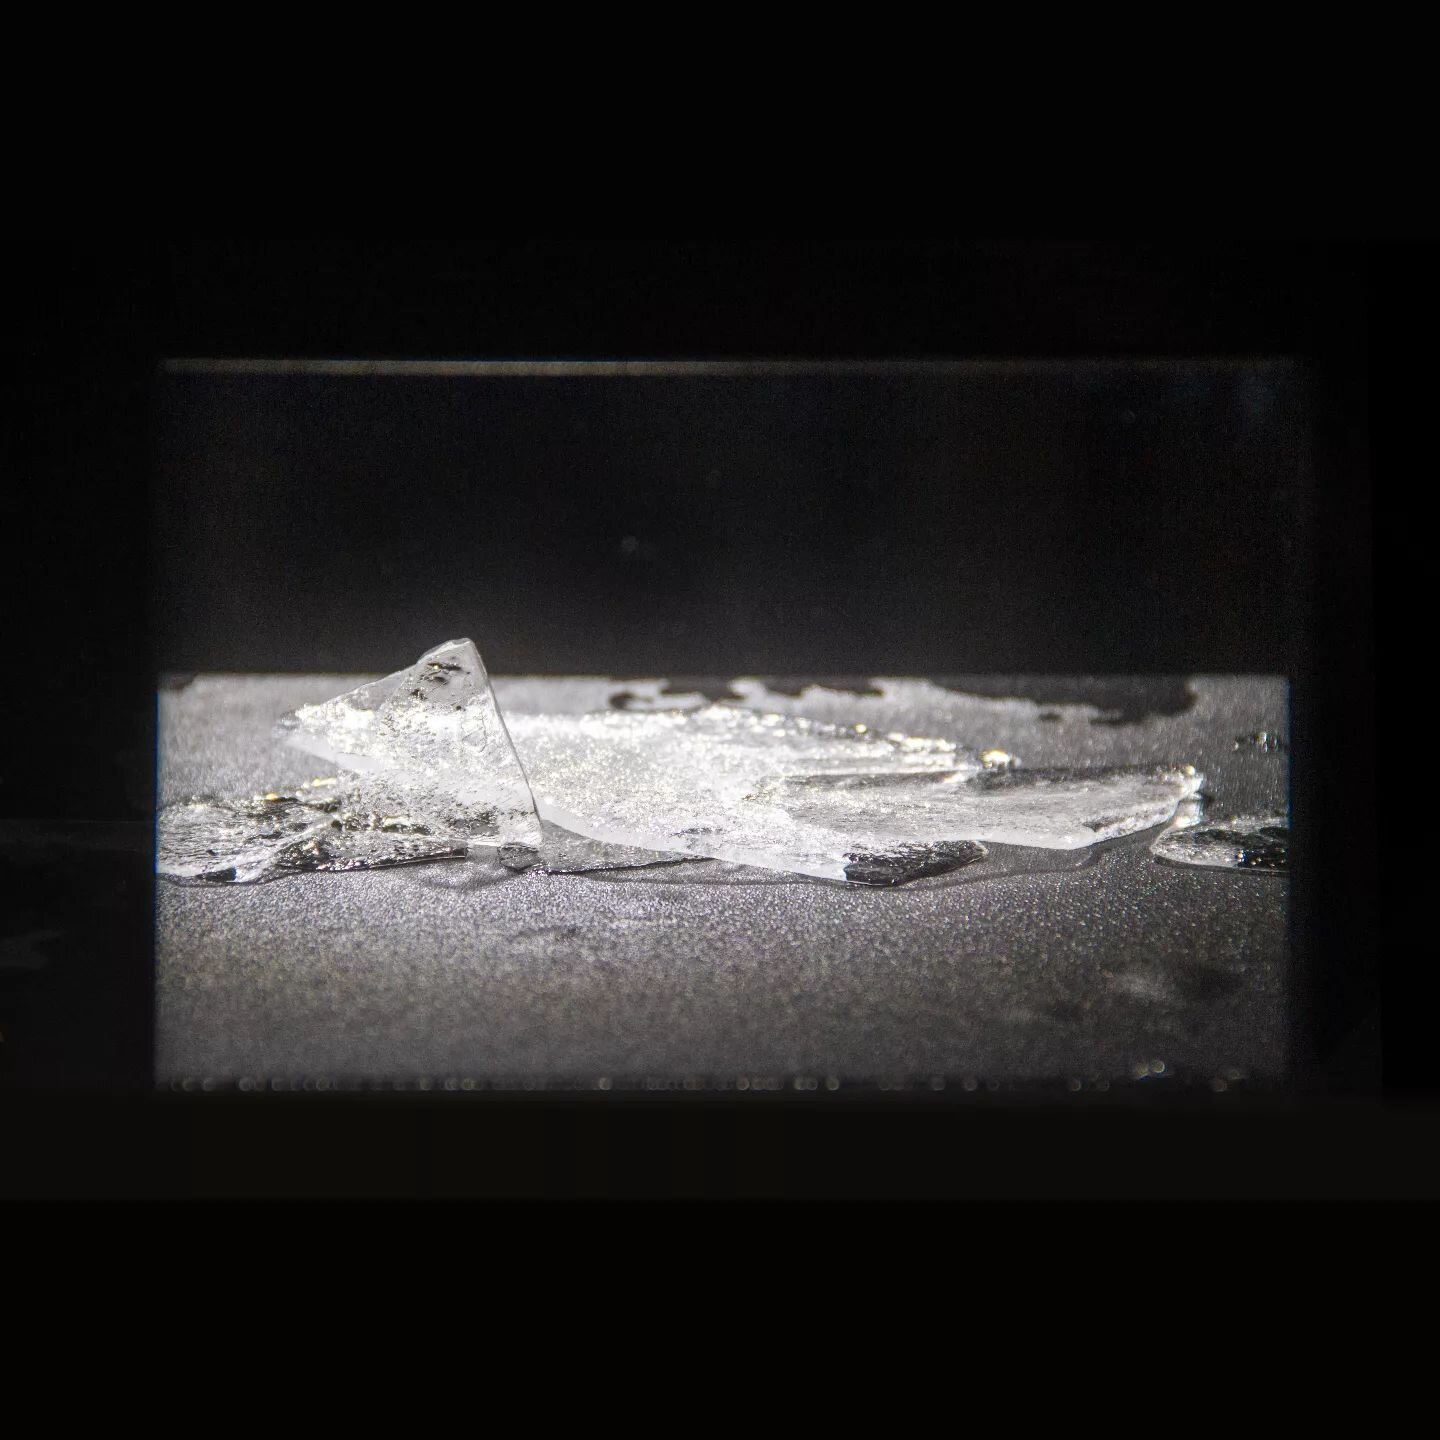 Scrying scene 2
.
.
#leannebellgonczarow #WIP #light #ice #reflection #obsidian #scrying #materialimagining
#contemporaryphotography #postphotography #digitalmateriality #artresearch #contemporaryart #kunst #climatecrisis #meltingice #newmaterialism 